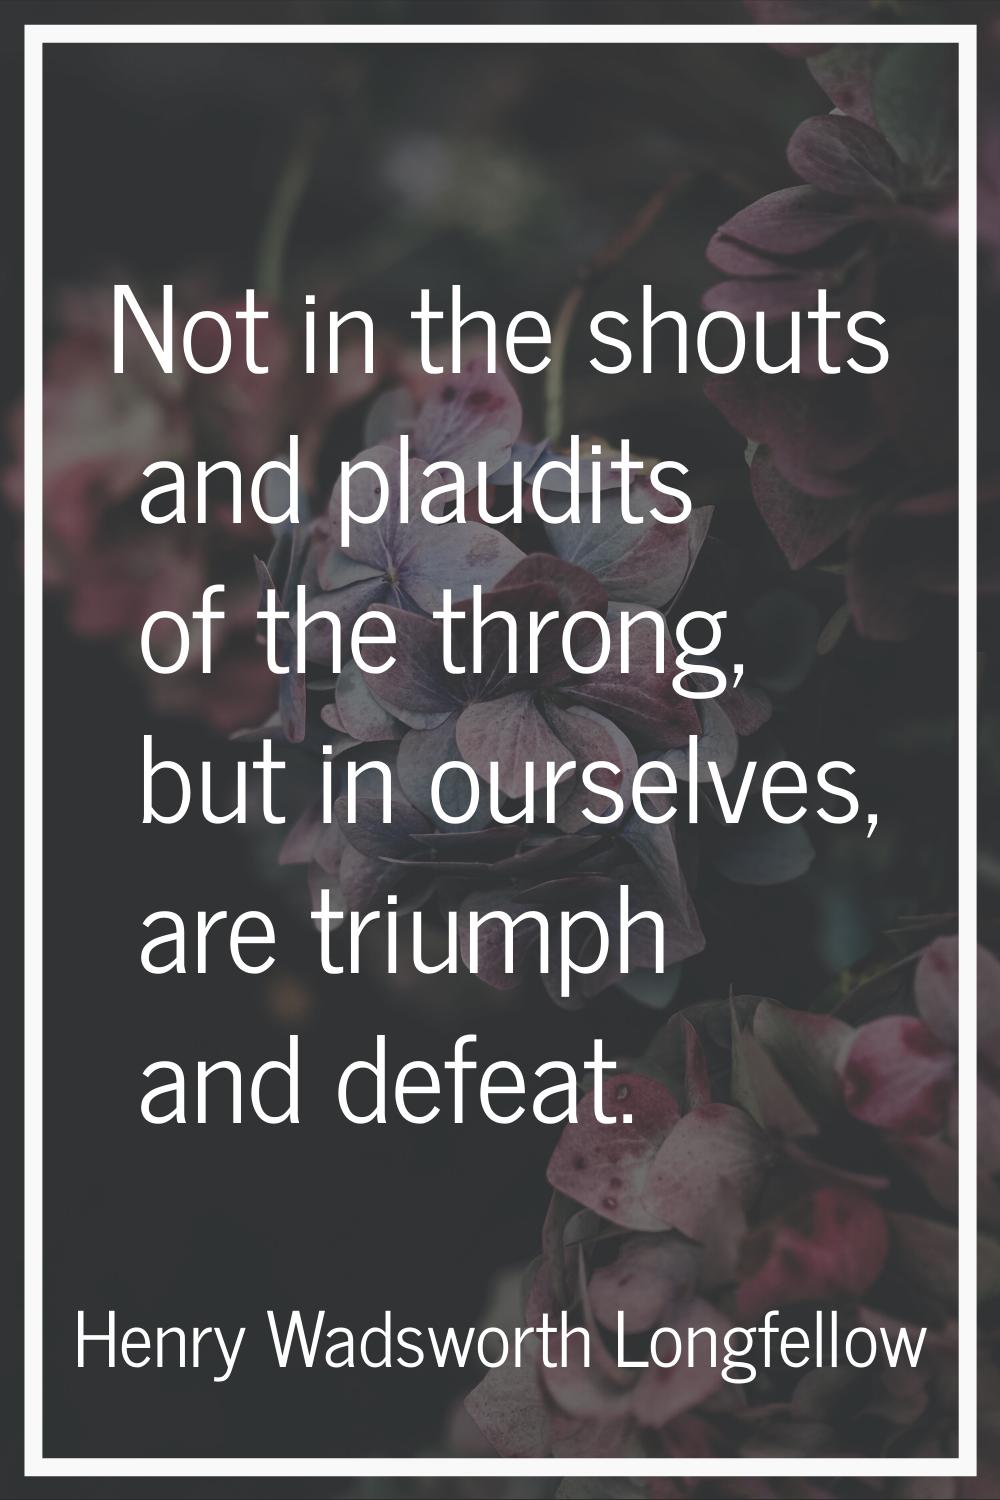 Not in the shouts and plaudits of the throng, but in ourselves, are triumph and defeat.